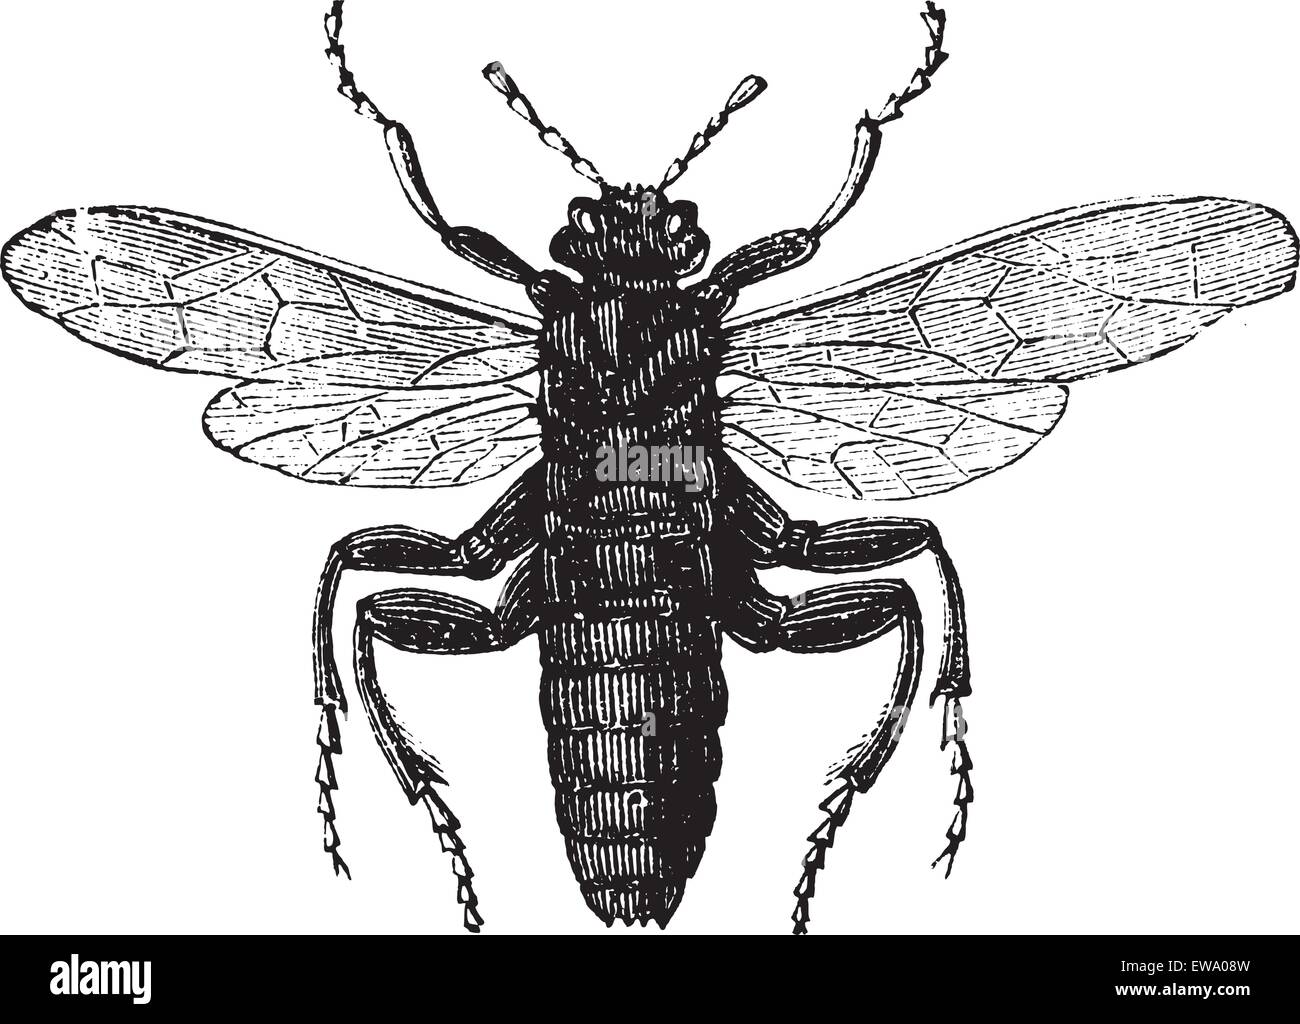 Elm Sawfly or Cimbex ulmi, vintage engraving. Old engraved illustration of an Elm Sawfly. Stock Vector